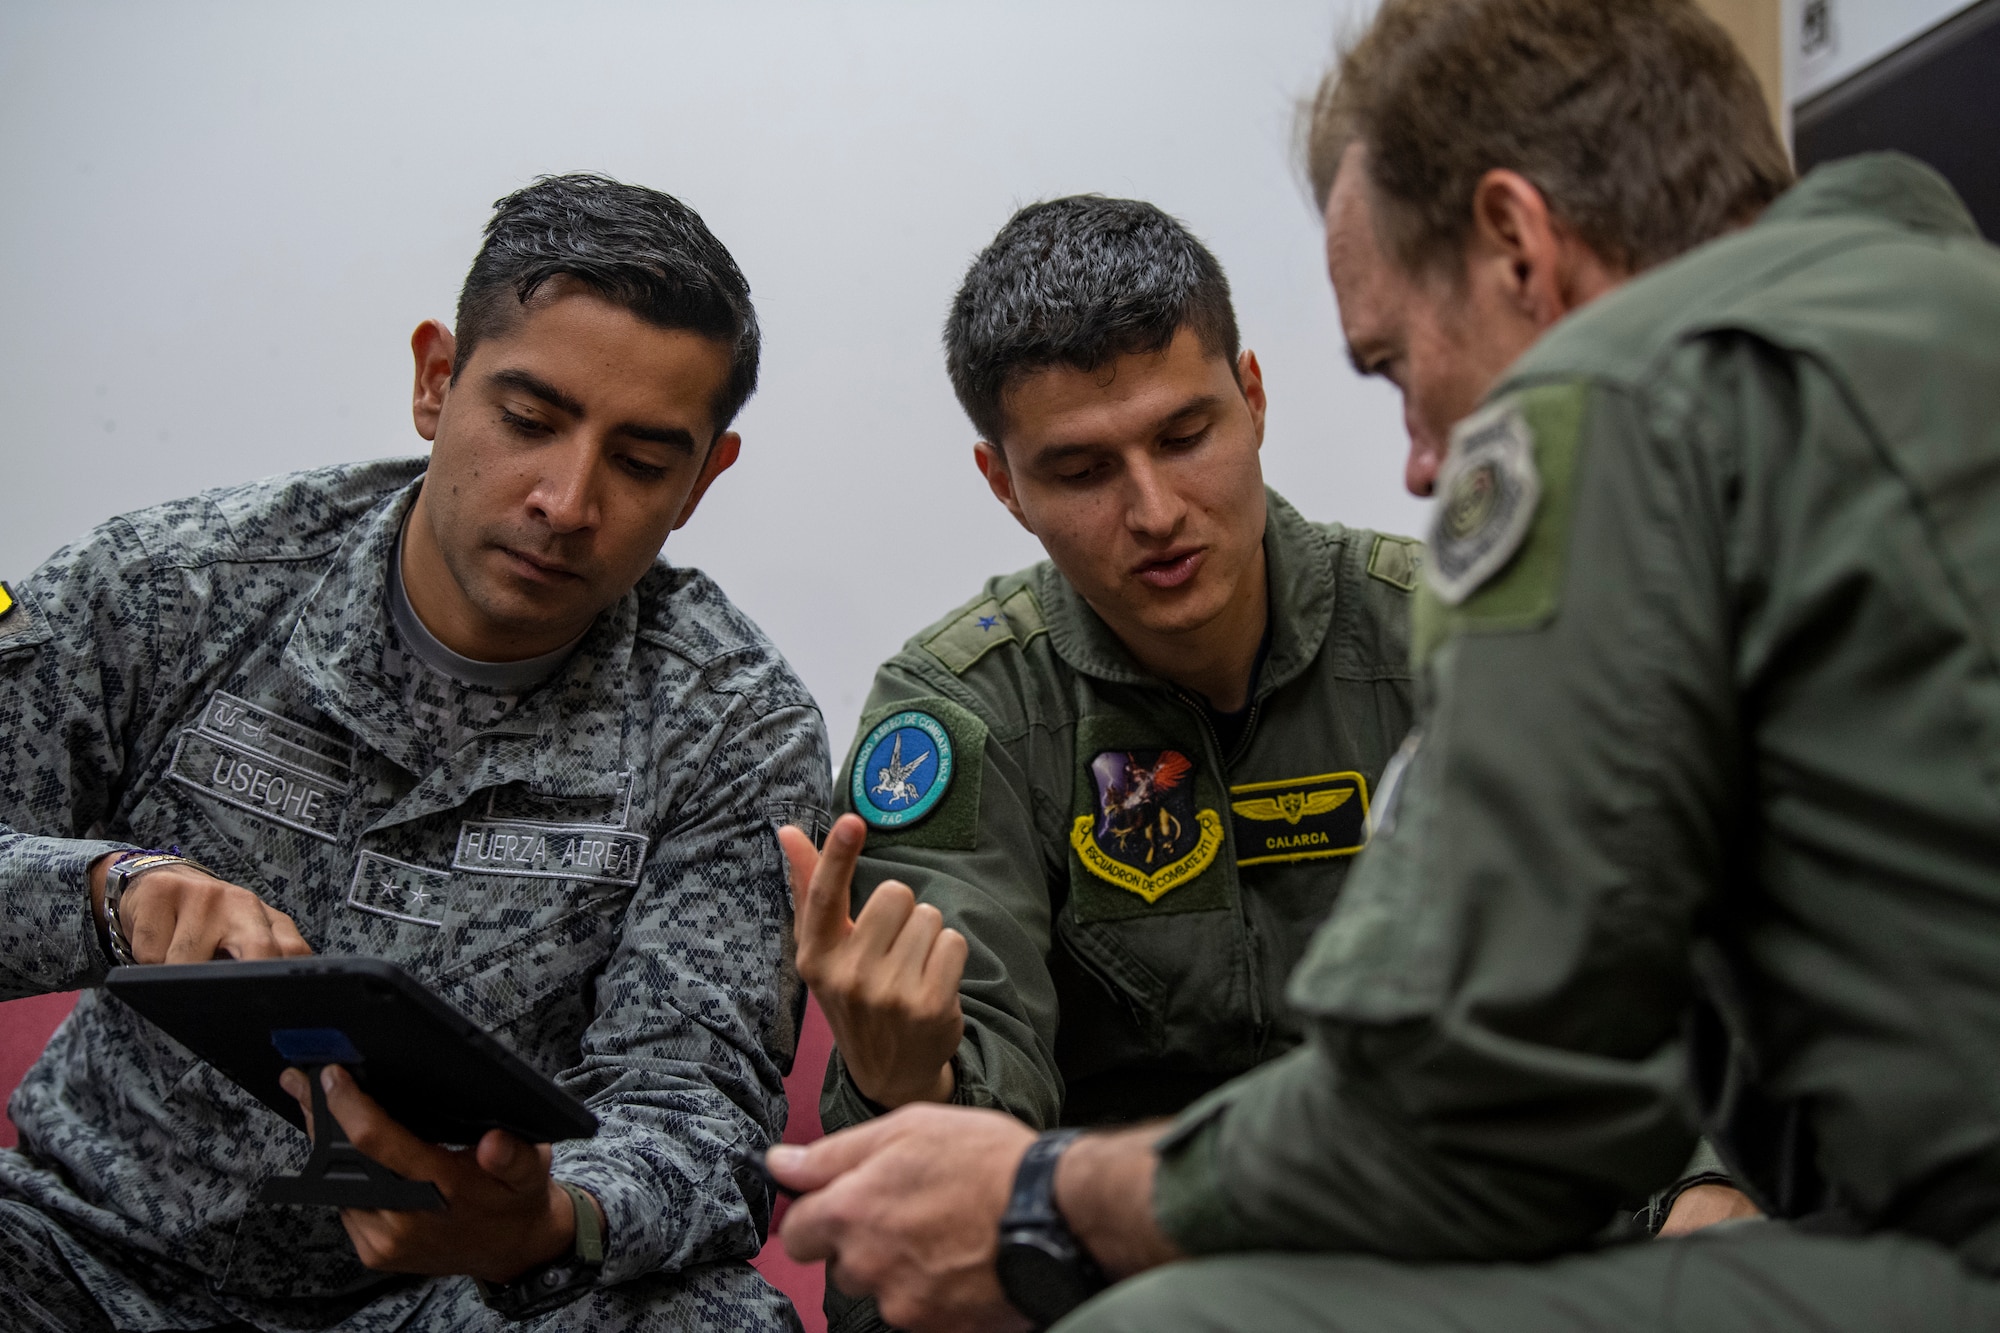 Colombian air force 1st Lt. Gabriel Enrique Useche, joint terminal attack controller, left; Colombian air force 1st Lt. Juan Pablo Valencia, pilot, center; and Craig Fisher, 81st Fighter Squadron supervisory instructor pilot, debrief after landing at Avon Park Air Force Range, Florida, May 10, 2022. The U.S. Air Force partnered with Colombia, Tunisia, Nigeria, and Thailand to co-develop tactics, techniques and procedures to combat violent extremist organizations while demonstrating the capabilities of the Airborne Extensible Relay Over-Horizon Network. (U.S. Air Force photo by Airman 1st Class Deanna Muir)